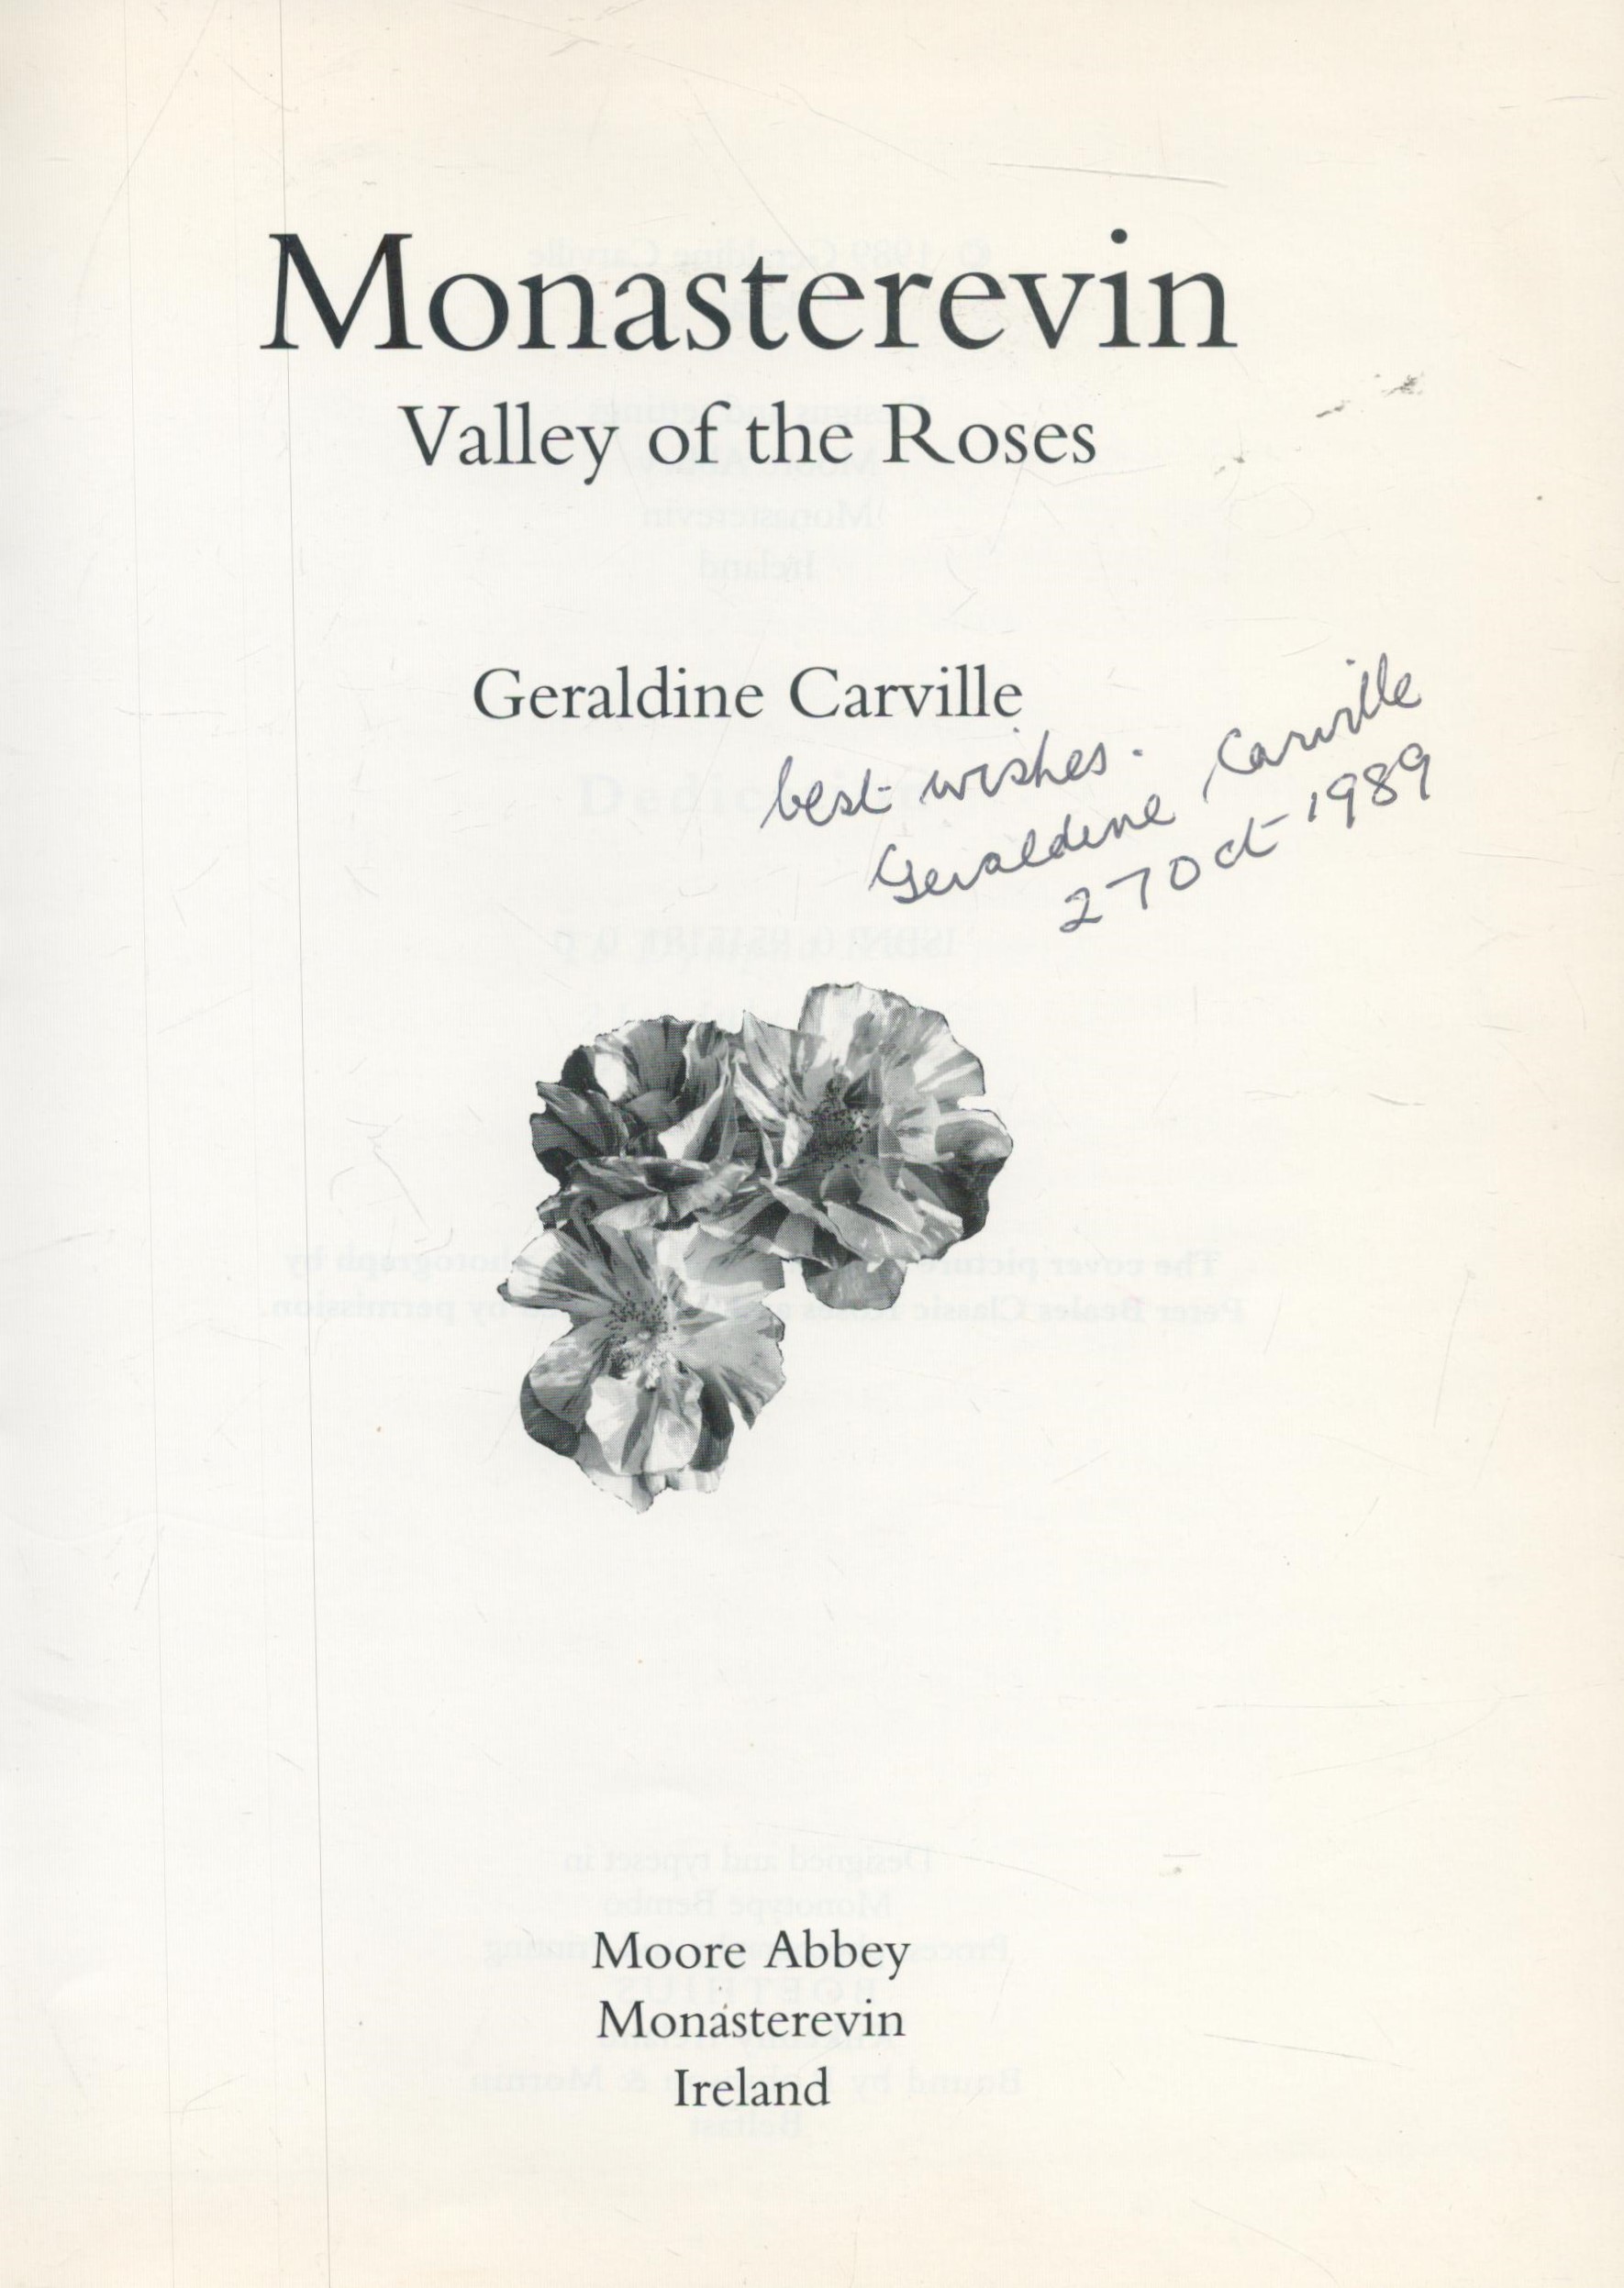 Monasterevin: Valley of the Roses by Geraldine Carville signed by author, First Edition 1989 - Image 2 of 3